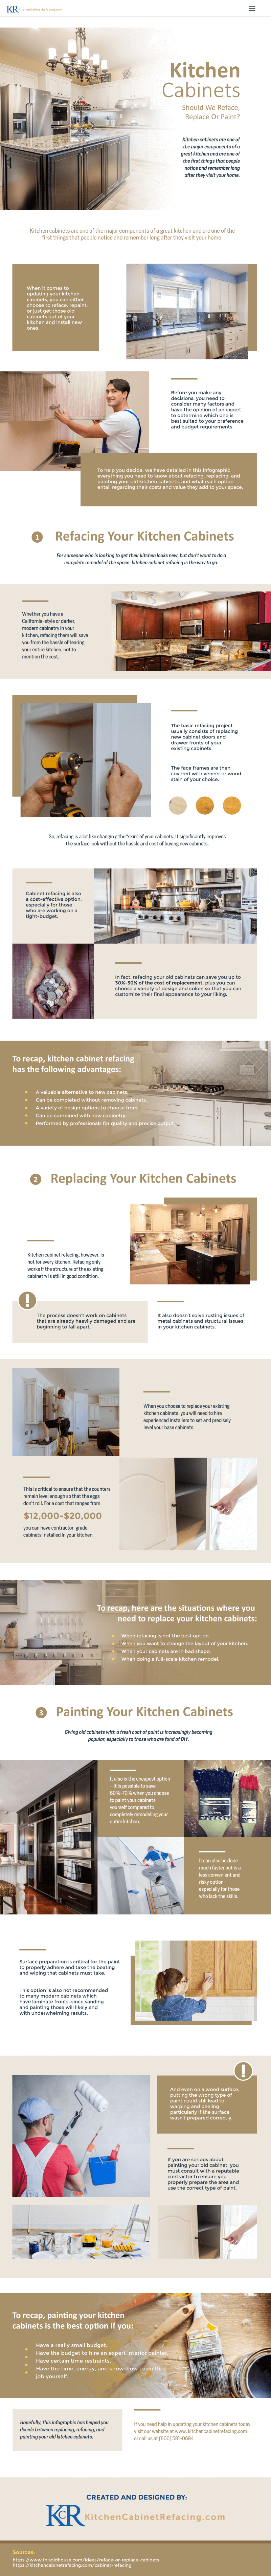 Kitchen-Cabinets-Should-we-Reface-Replace-or-Paint